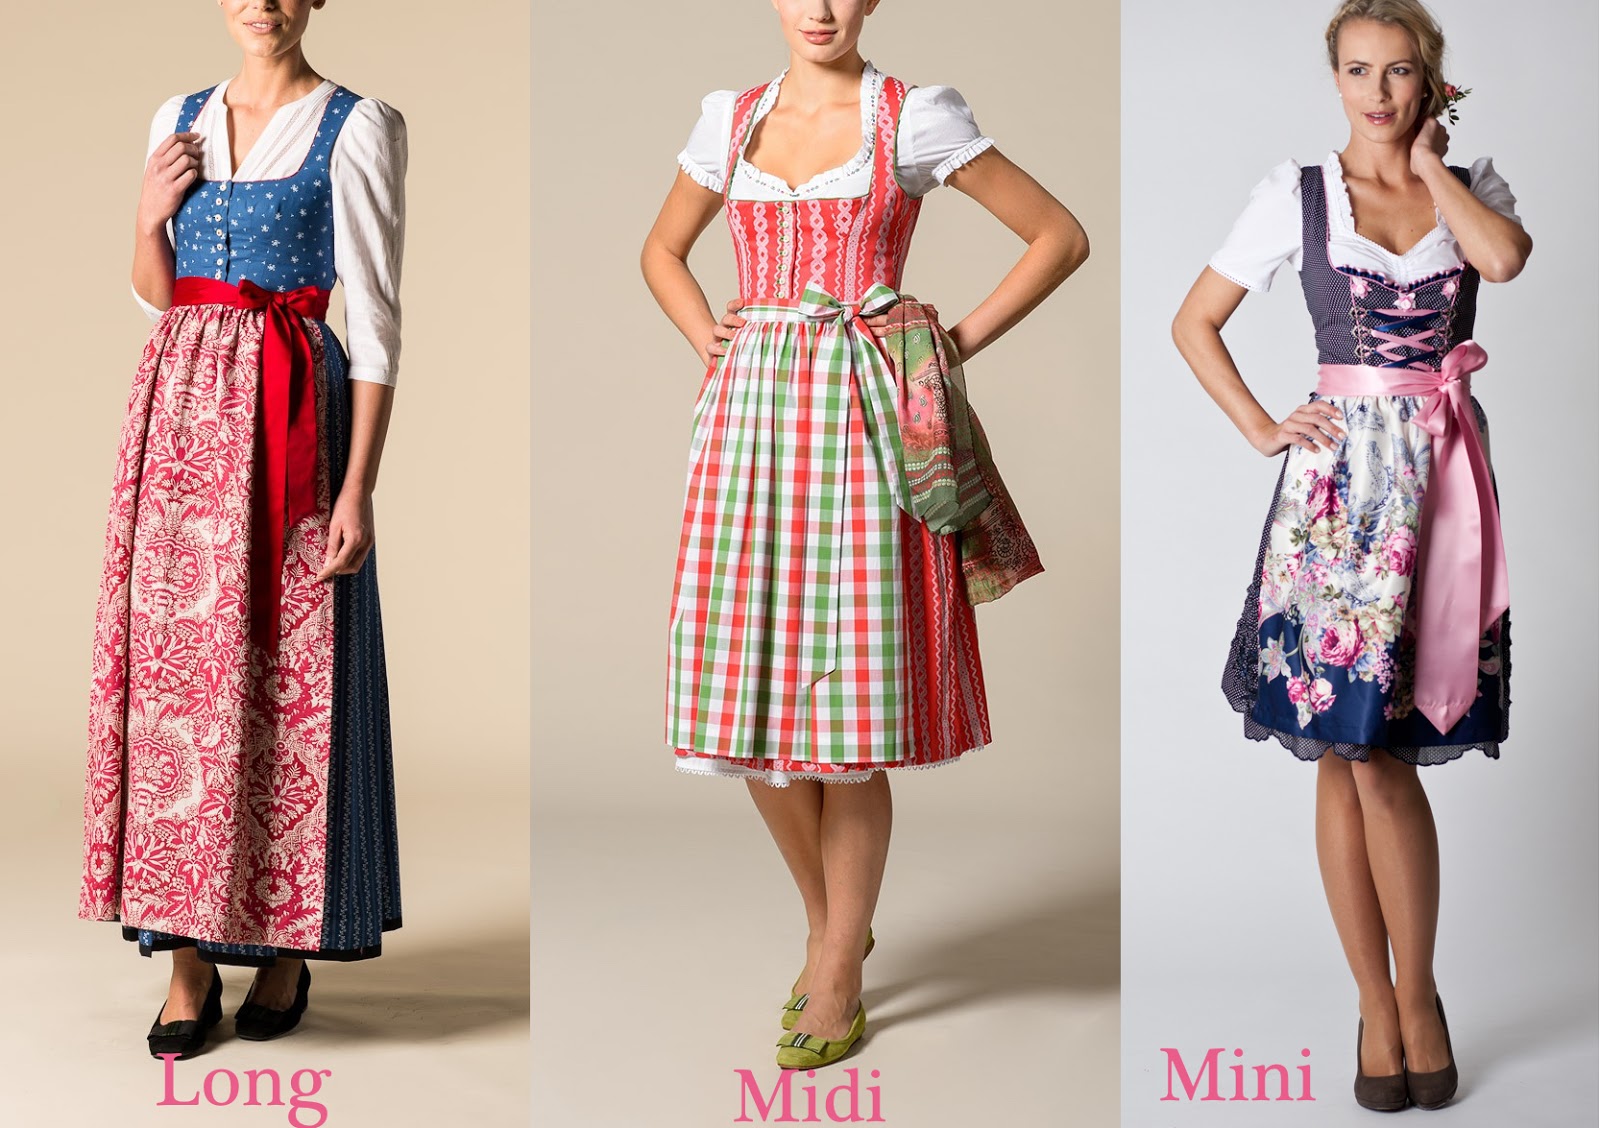 What to Wear to the Oktoberfest